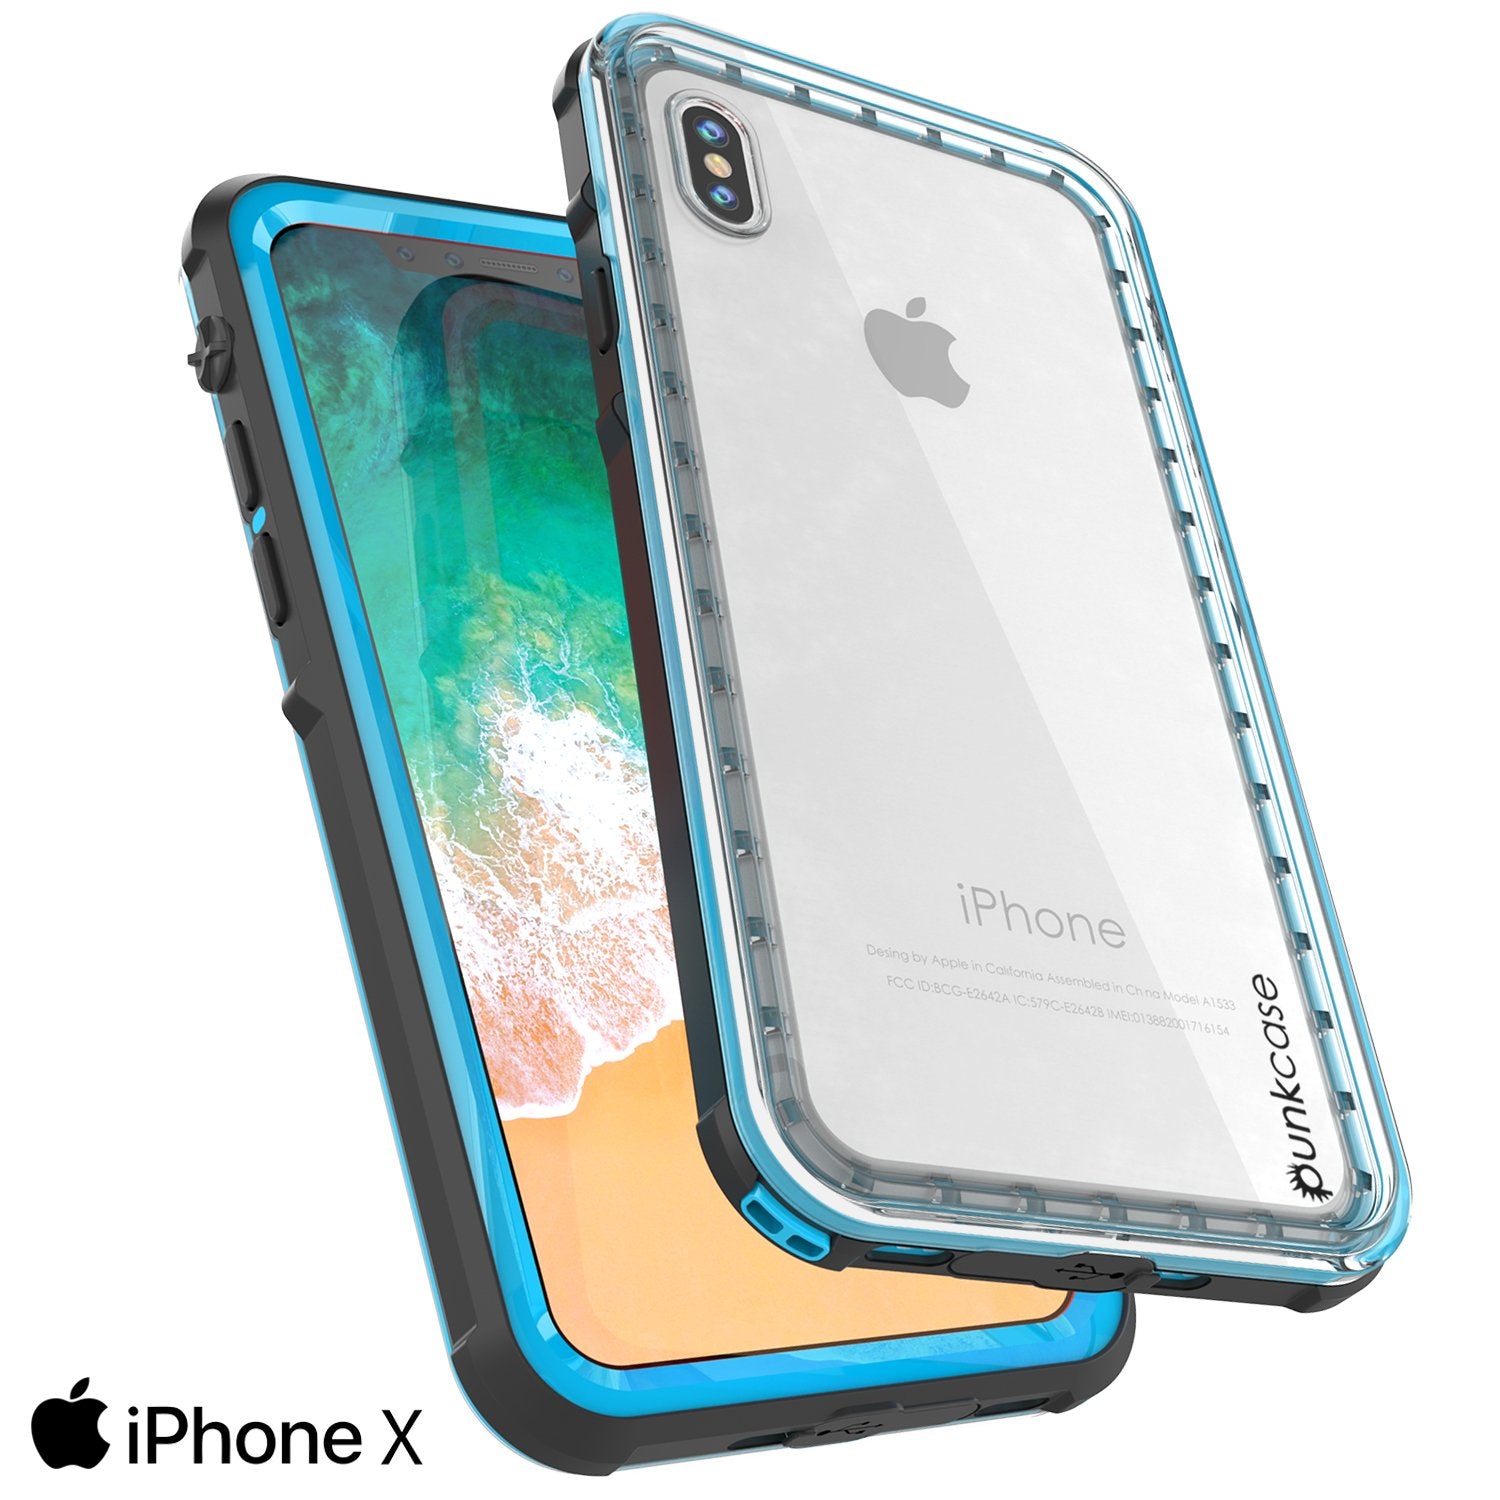 iPhone X Case, PUNKCase [CRYSTAL SERIES] Protective IP68 Certified Cover W/ Attached Screen Protector - DustPROOF, ShockPROOF, SnowPROOF - Ultra Slim Fit for Apple iPhone 10 [LIGHT BLUE]